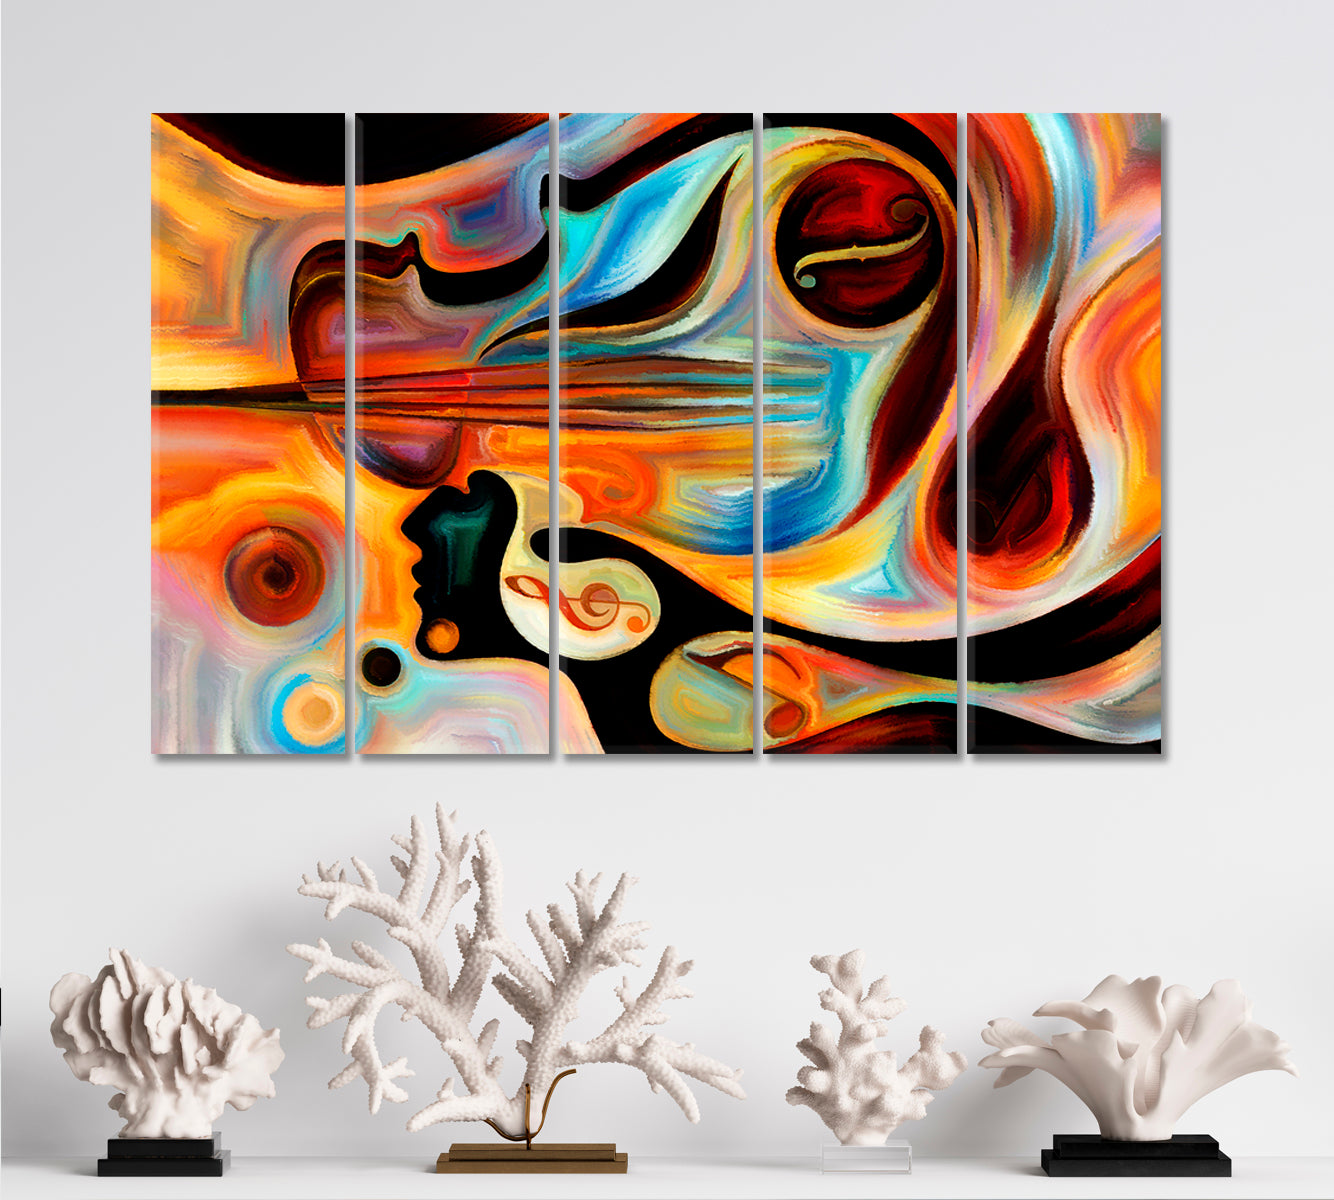 INNER MELODY Modern Colorful Human Musical Shapes Abstraction Music Wall Panels Artesty   